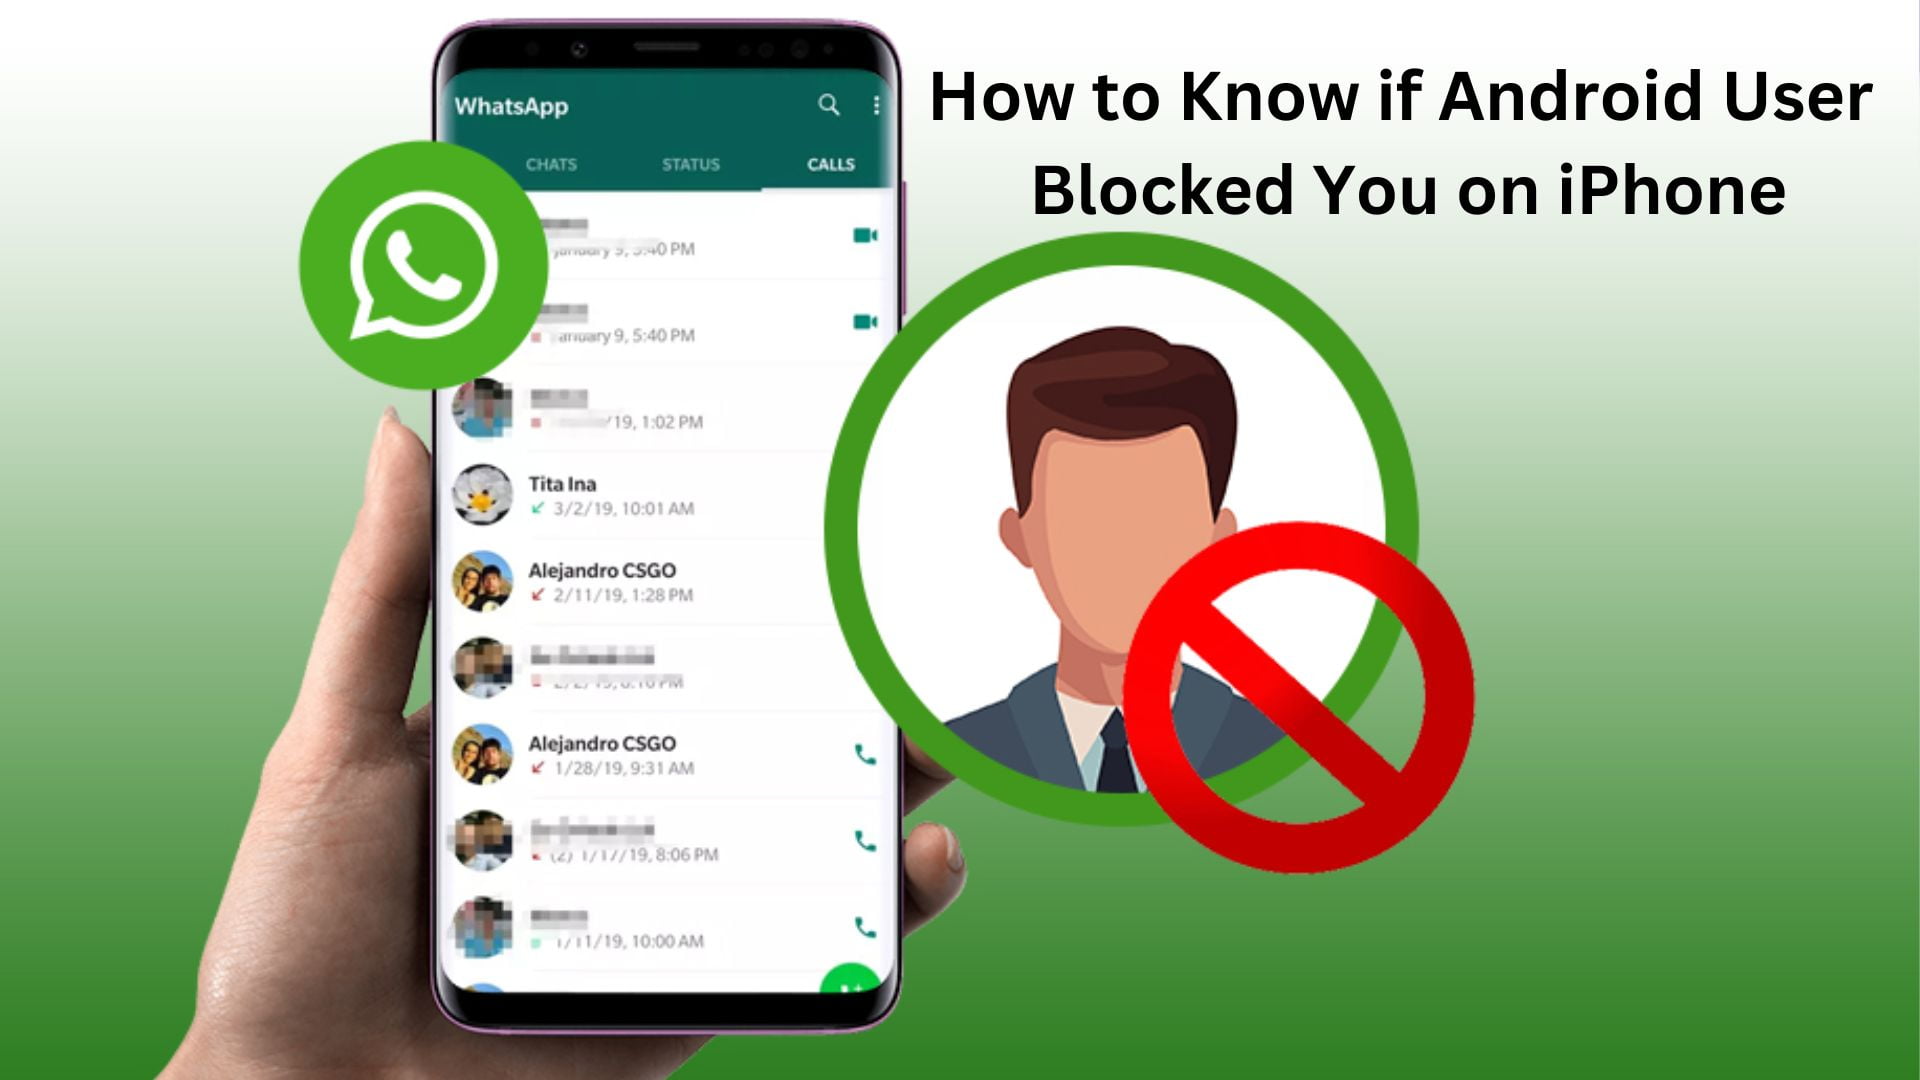 How to Know if Android User Blocked You on iPhone